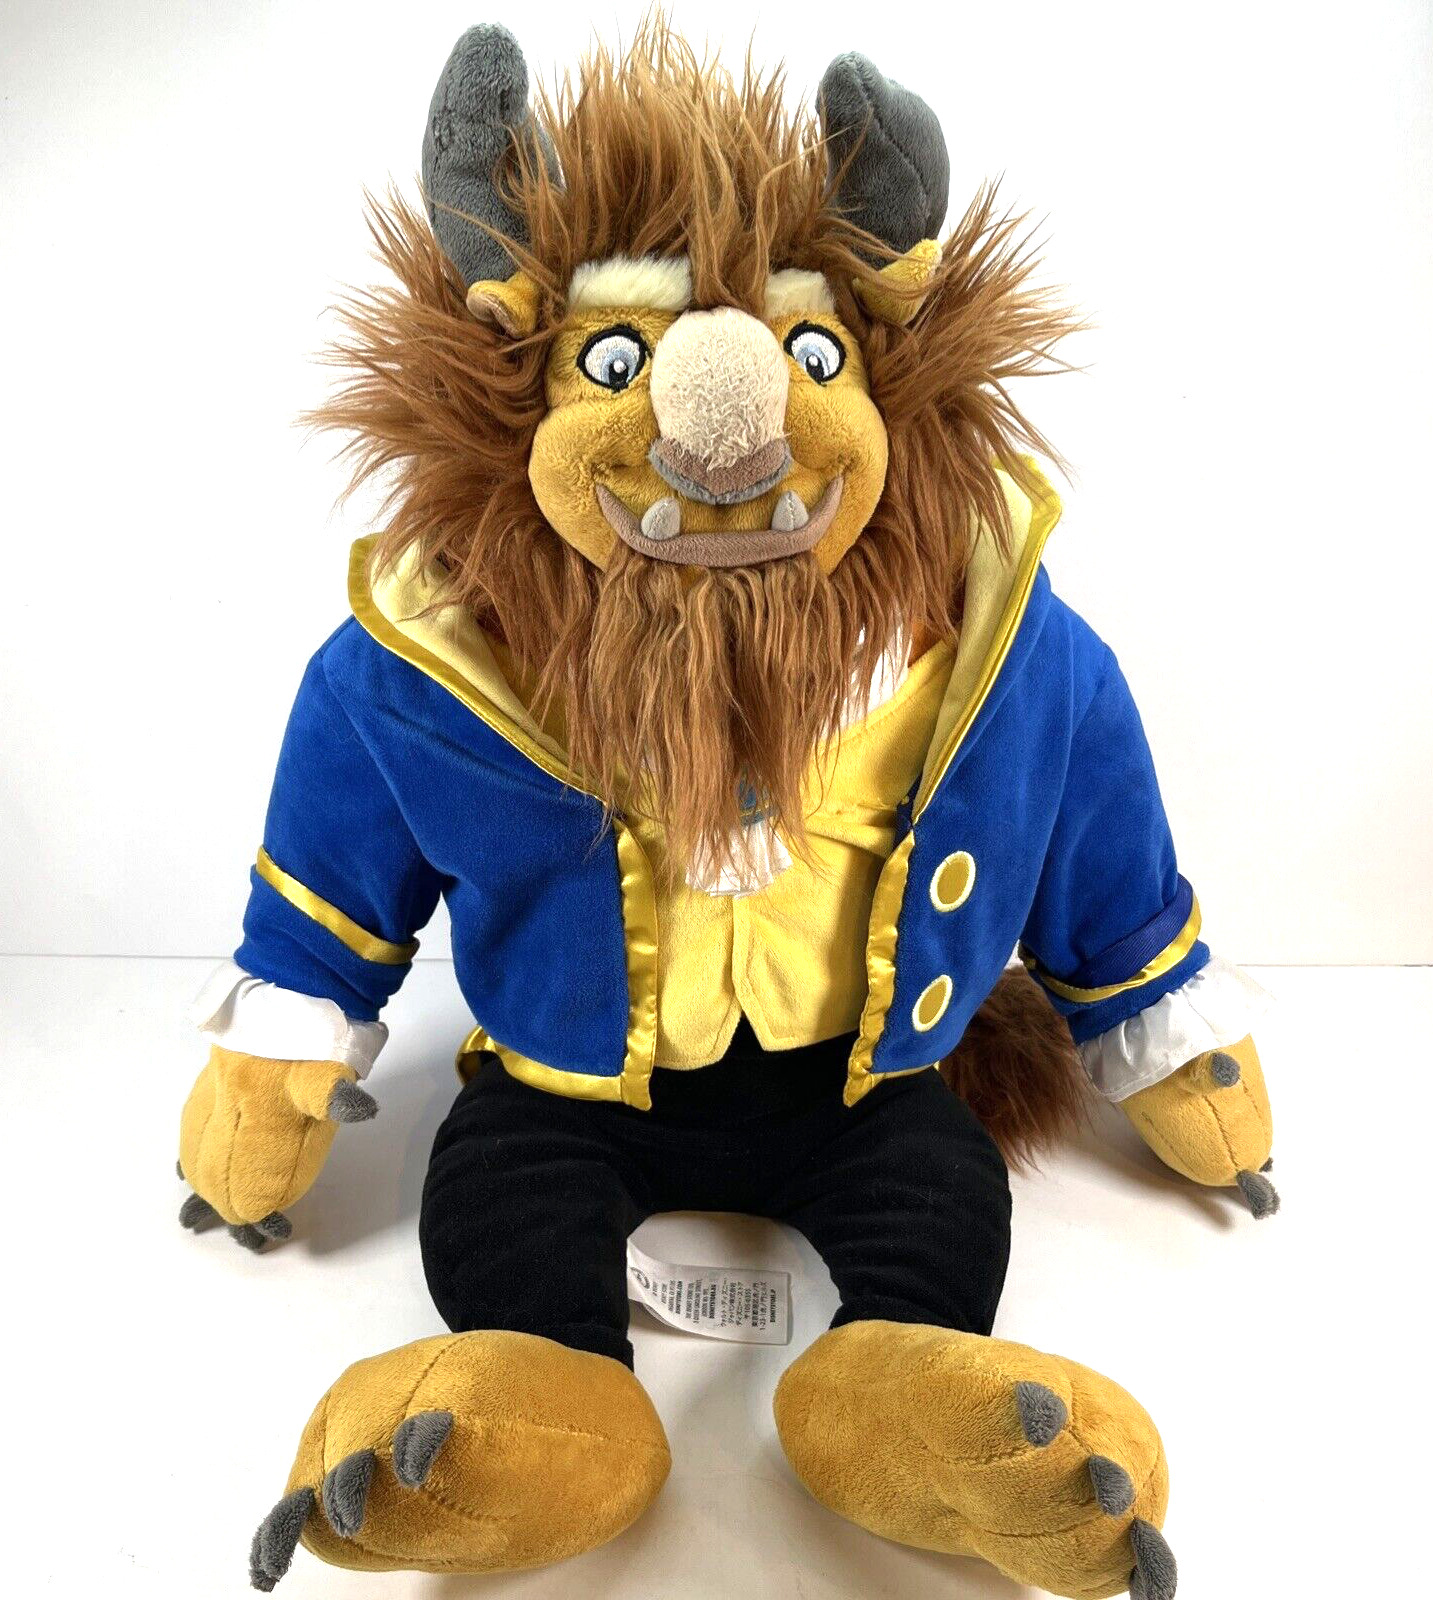 Official Disney Store  LARGE BEAST Plush From Beauty & The Beast  20 Inches Tall